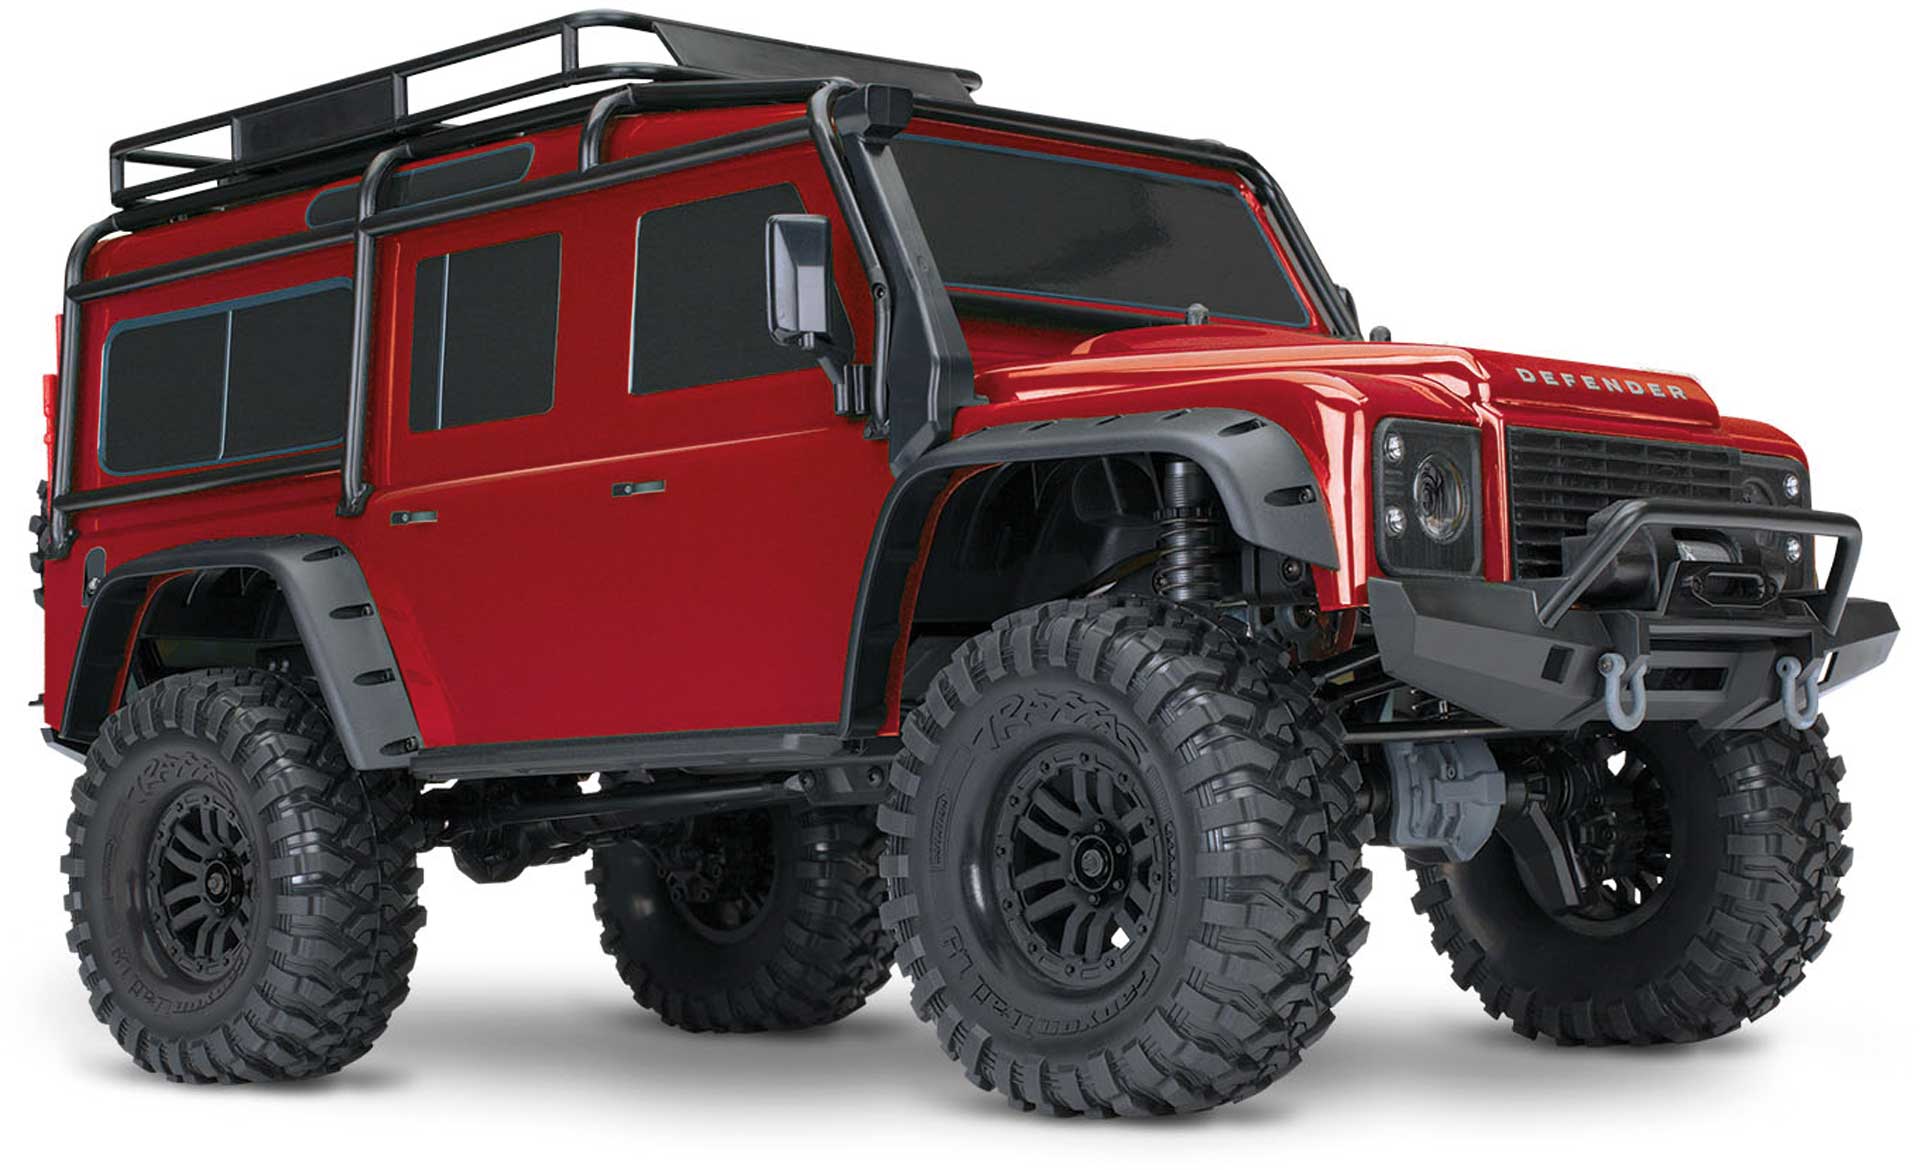 TRAXXAS TRX-4 LAND ROVER DEFENDER RTR 1710 4WD